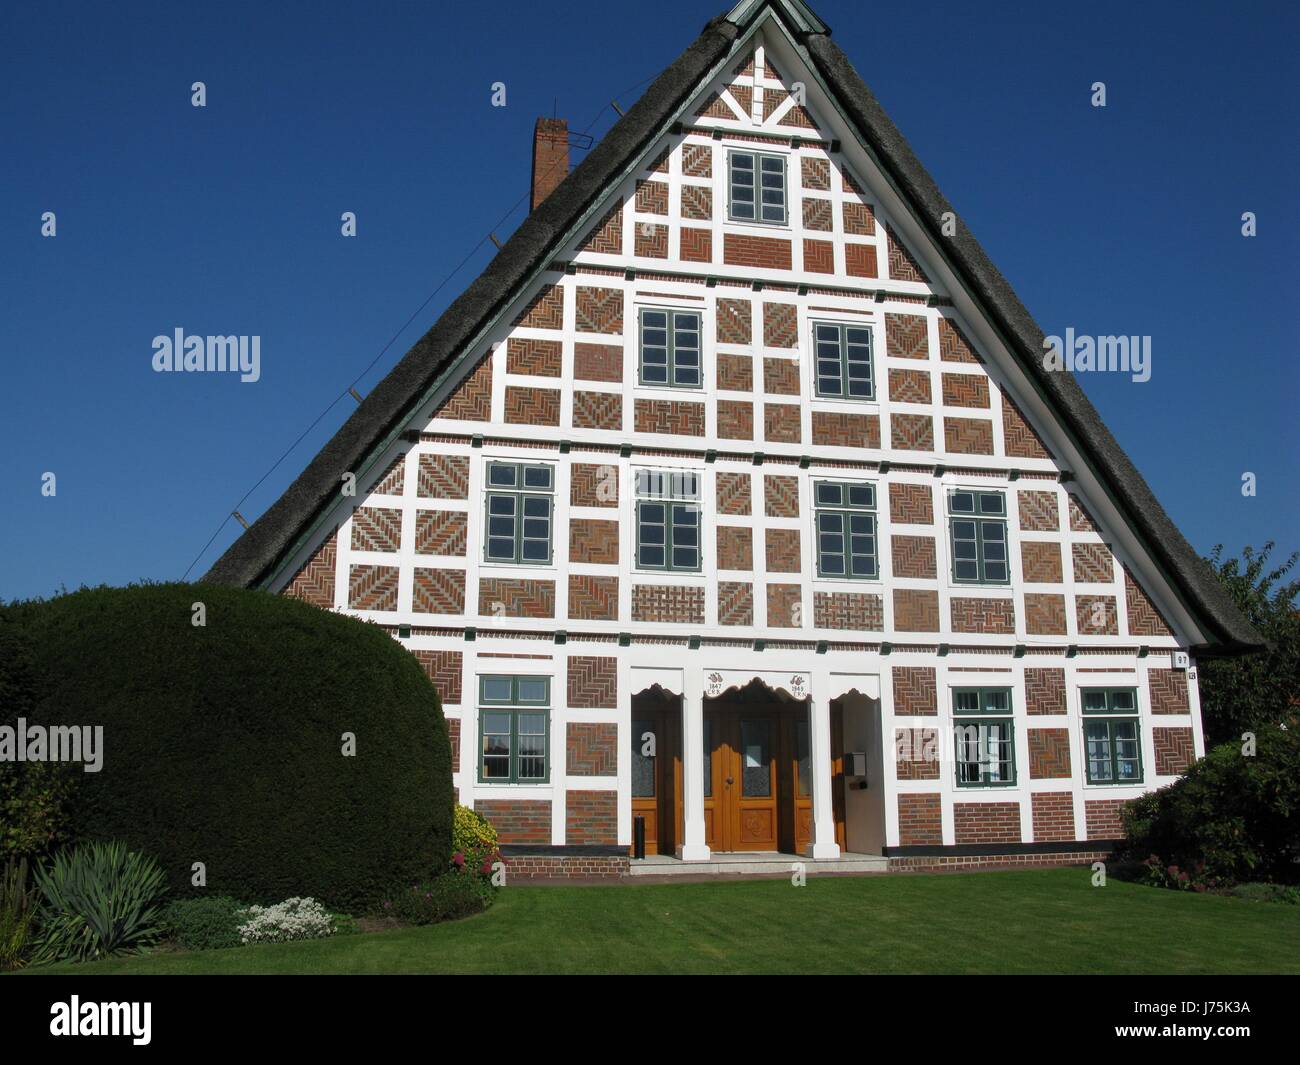 house building frame-work germany german federal republic farmhouse lower Stock Photo